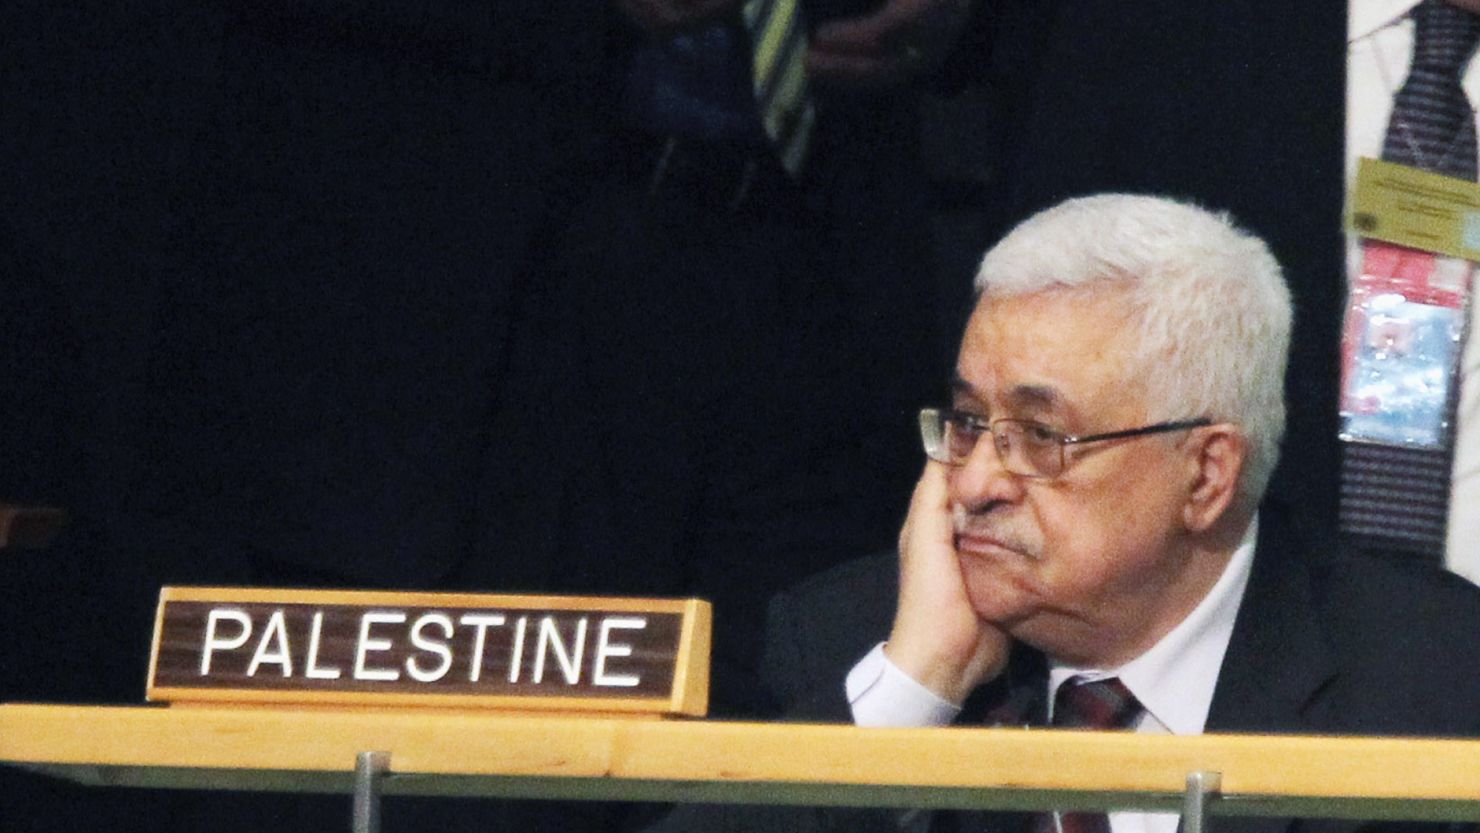 Palestinian Authority President Mahmoud Abbas looks on during the U.N. General Assembly meeting Wednesday.